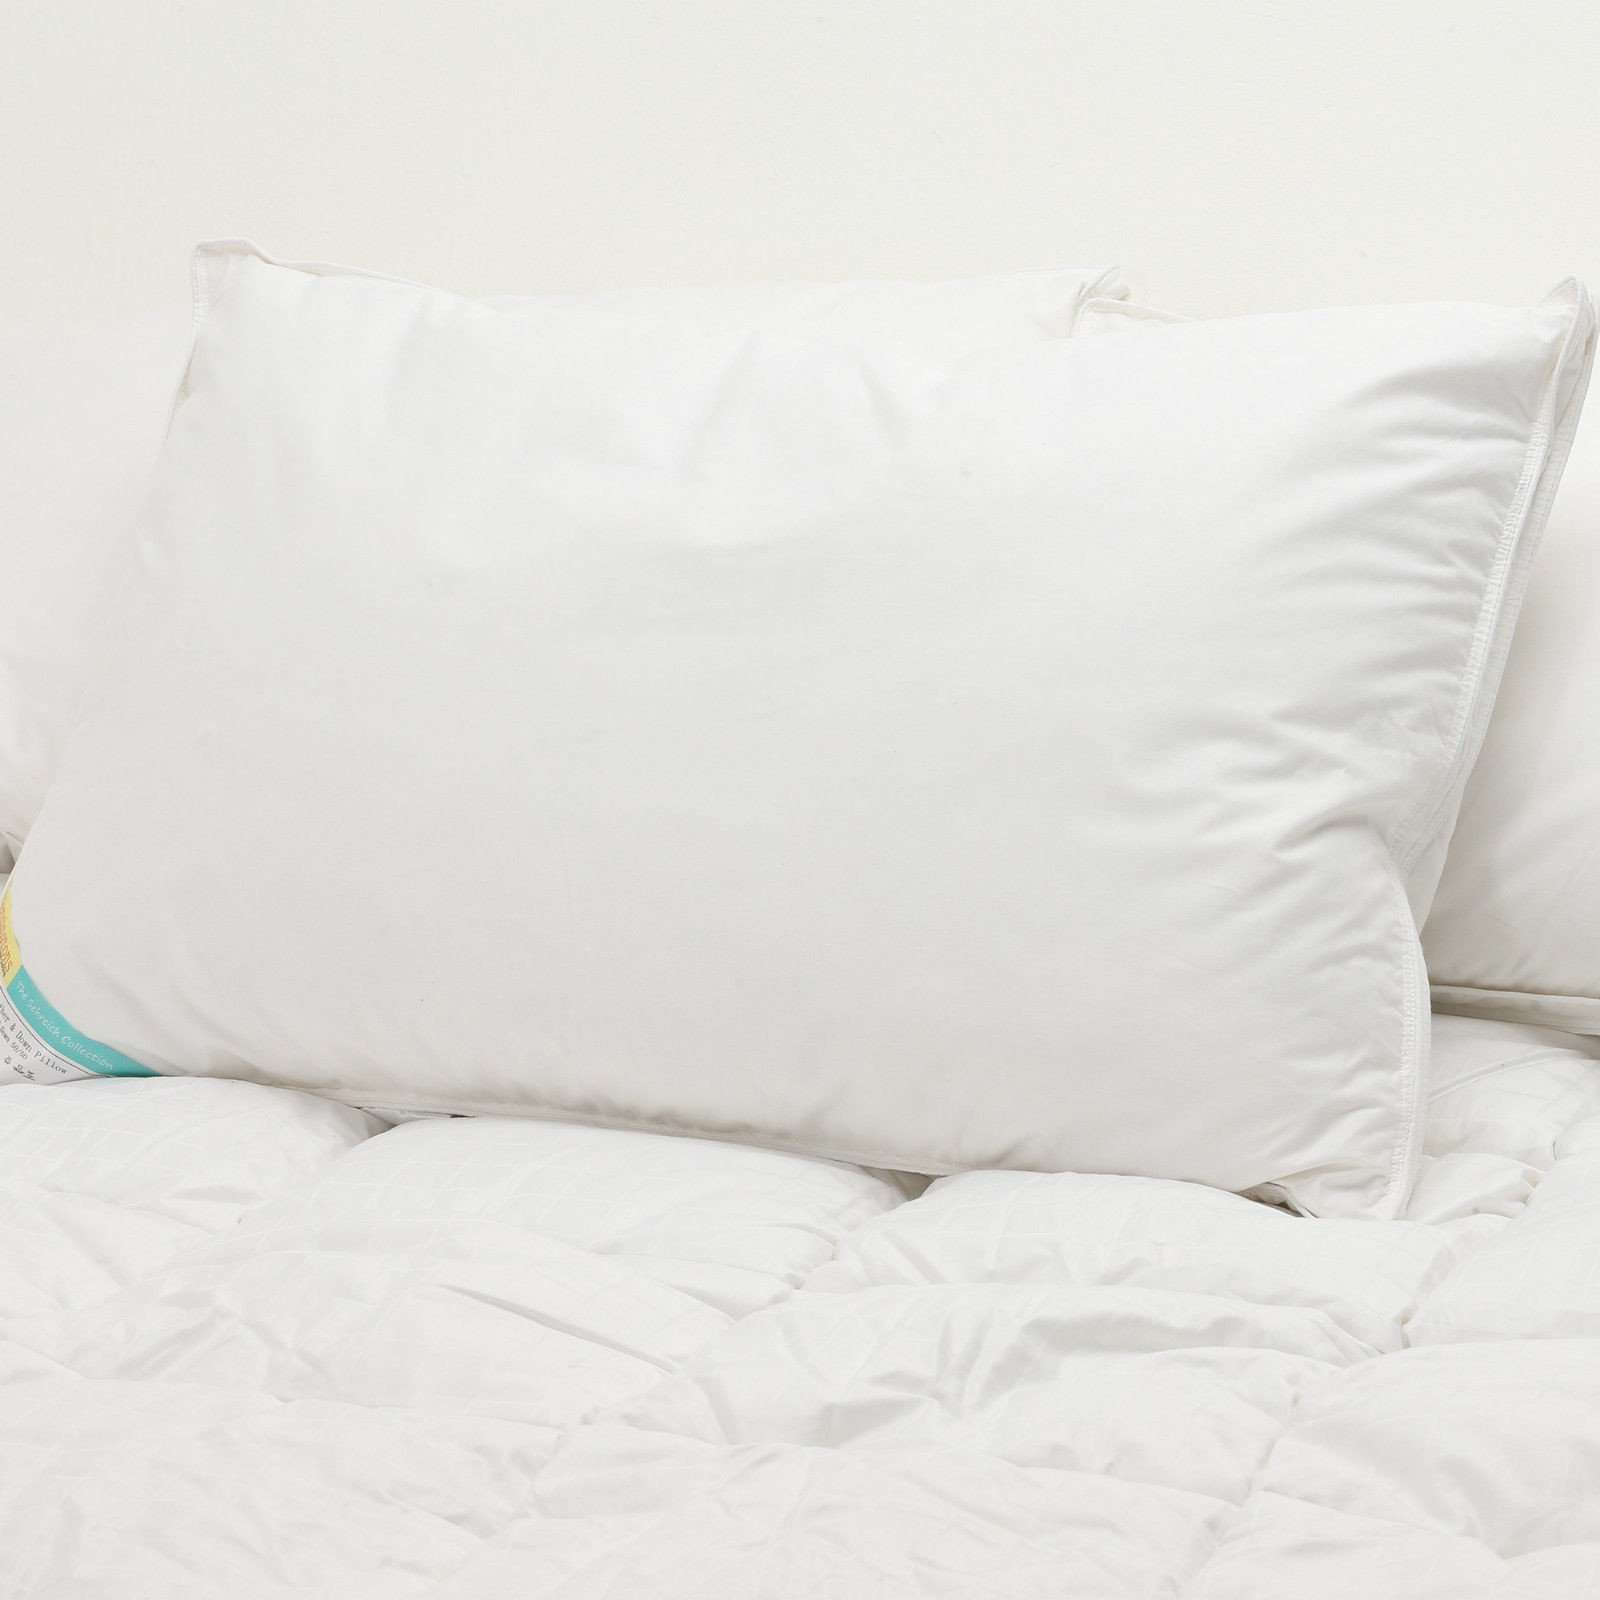 Soft-and-Supportive-Pillow-with-1000g-of-Fill